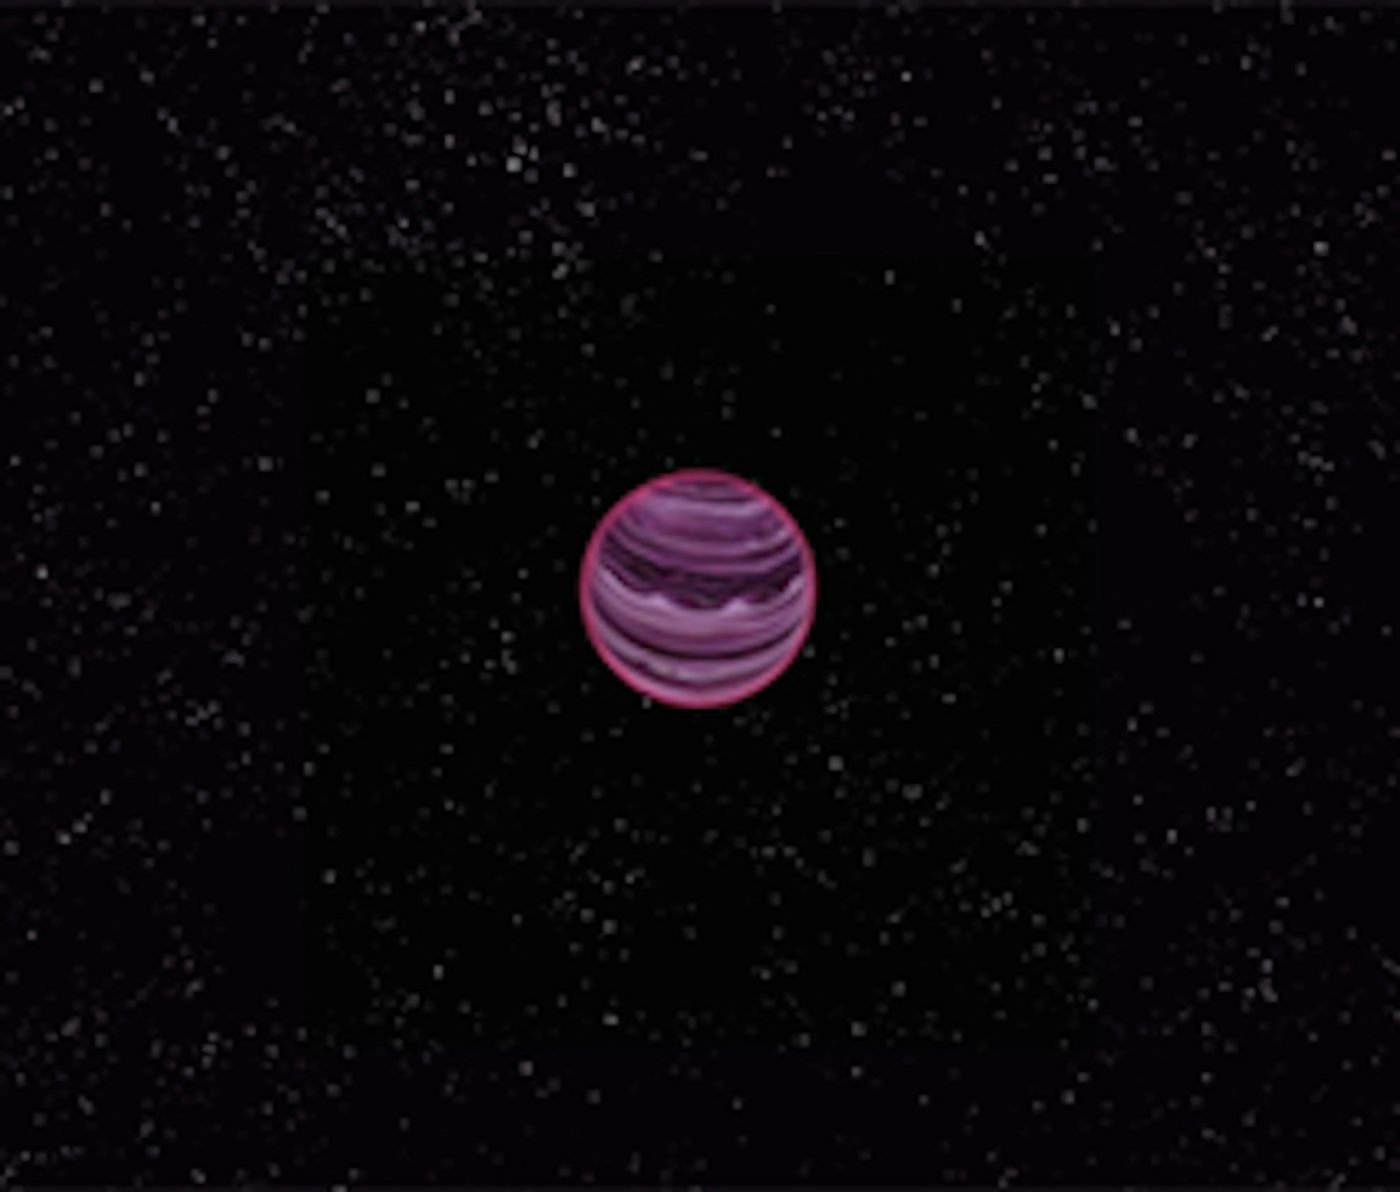 An artist's conception of PSO J318.5-22, the first rogue planet ever seen by astronomers